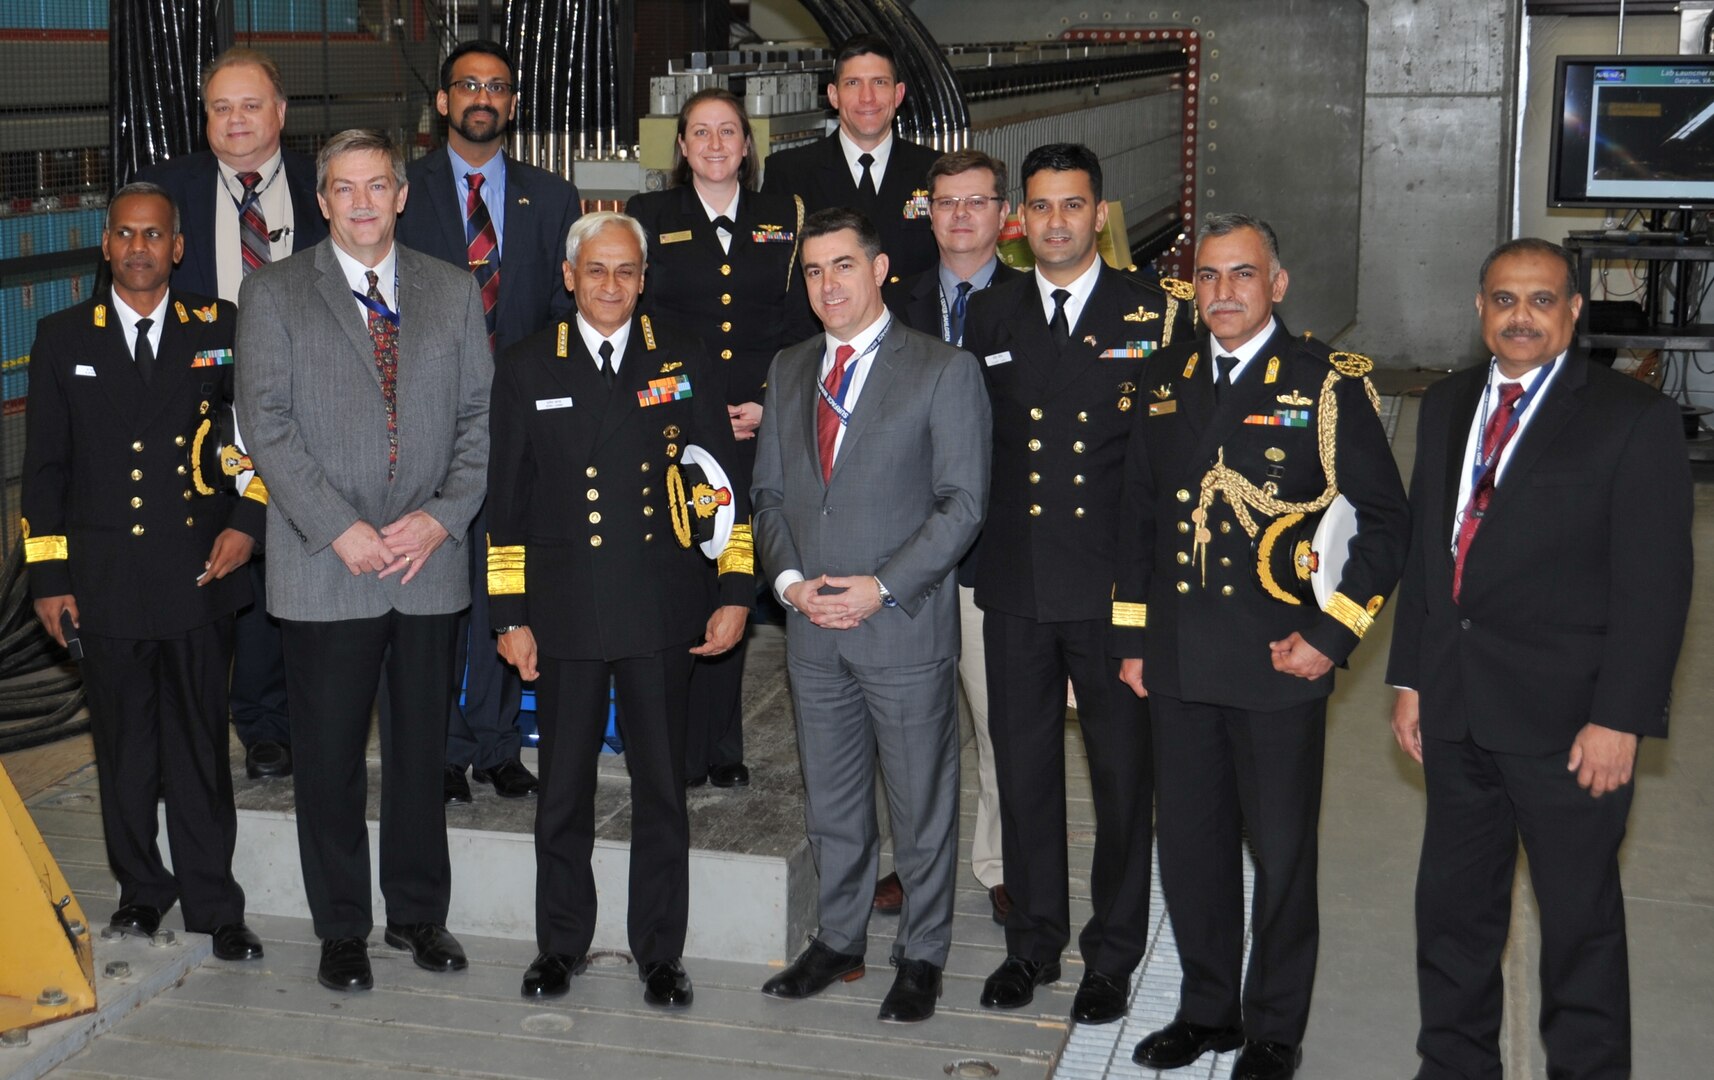 IMAGE: DAHLGREN, Va. (March 22, 2018) - Indian Navy Chief Adm. Sunil Lanba, center, and his delegation are pictured with Naval Surface Warfare Center Dahlgren Division (NSWCDD) leadership in front of the electromagnetic railgun prototype launcher. Lanba led the Indian delegation on an NSWCDD tour that included technical briefings on the U.S. Navy's Aegis Combat System, Directed Energy, and Electromagnetic Railgun Programs. They saw how the command integrates and develops complex warfare systems to incorporate electric weapons technology into existing and future fighting forces and platforms. Navy pilots from Naval Air Warfare Center Aircraft Division also briefed India's top admiral as he flew aboard an MH-60R Seahawk for a demonstration of the helicopter's capabilities. The MH-60R Seahawk missions are anti-submarine warfare, anti-surface warfare, surveillance, communications relay, combat search and rescue, naval gunfire support and logistics support. 

Lanba's NSWCDD visit came on the heels of his meeting with U.S. Chief of Naval Operations Adm. John Richardson at the Pentagon. The two heads of Navy met with U.S. Secretary of the Navy Richard Spencer on March 21 to discuss ways the two nations could improve interoperability that include additional naval exercises and staff talks. "The relationship between the U.S. Navy and the Indian Navy has never been stronger," said Richardson. "There has been meaningful progress made in strengthening the cooperation between our two great democratic and maritime nations. We are exploring every way to expand that partnership even further based on our shared interests."